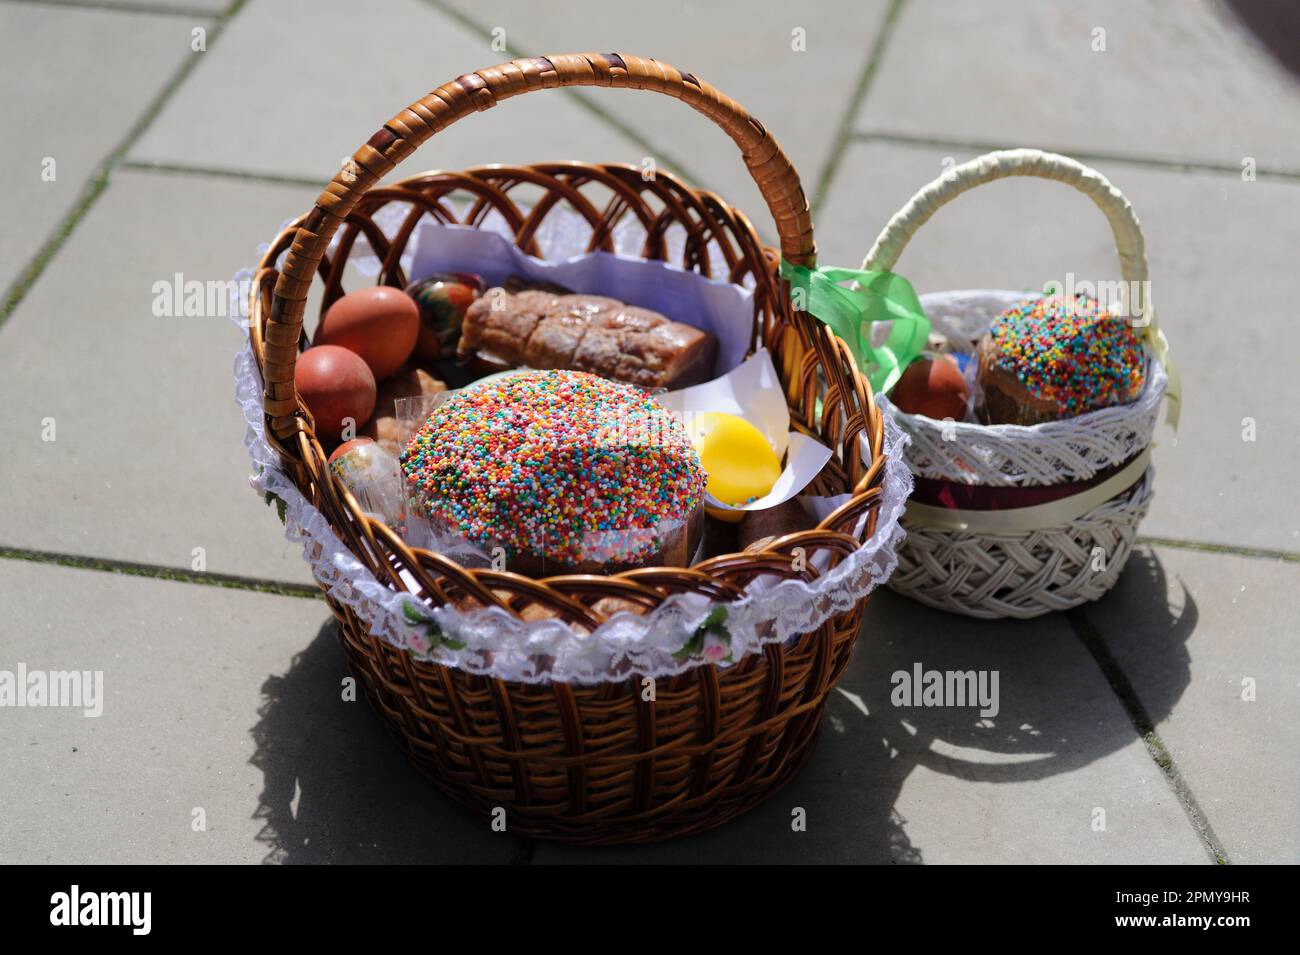 Lviv, Ukraine 15 April 2023. Easter basket seen before consecration at a Greek Catholic Church as they celebrate Easter to mark the resurrection of Jesus Christ from the dead and the foundation of the Christian faith. Stock Photo